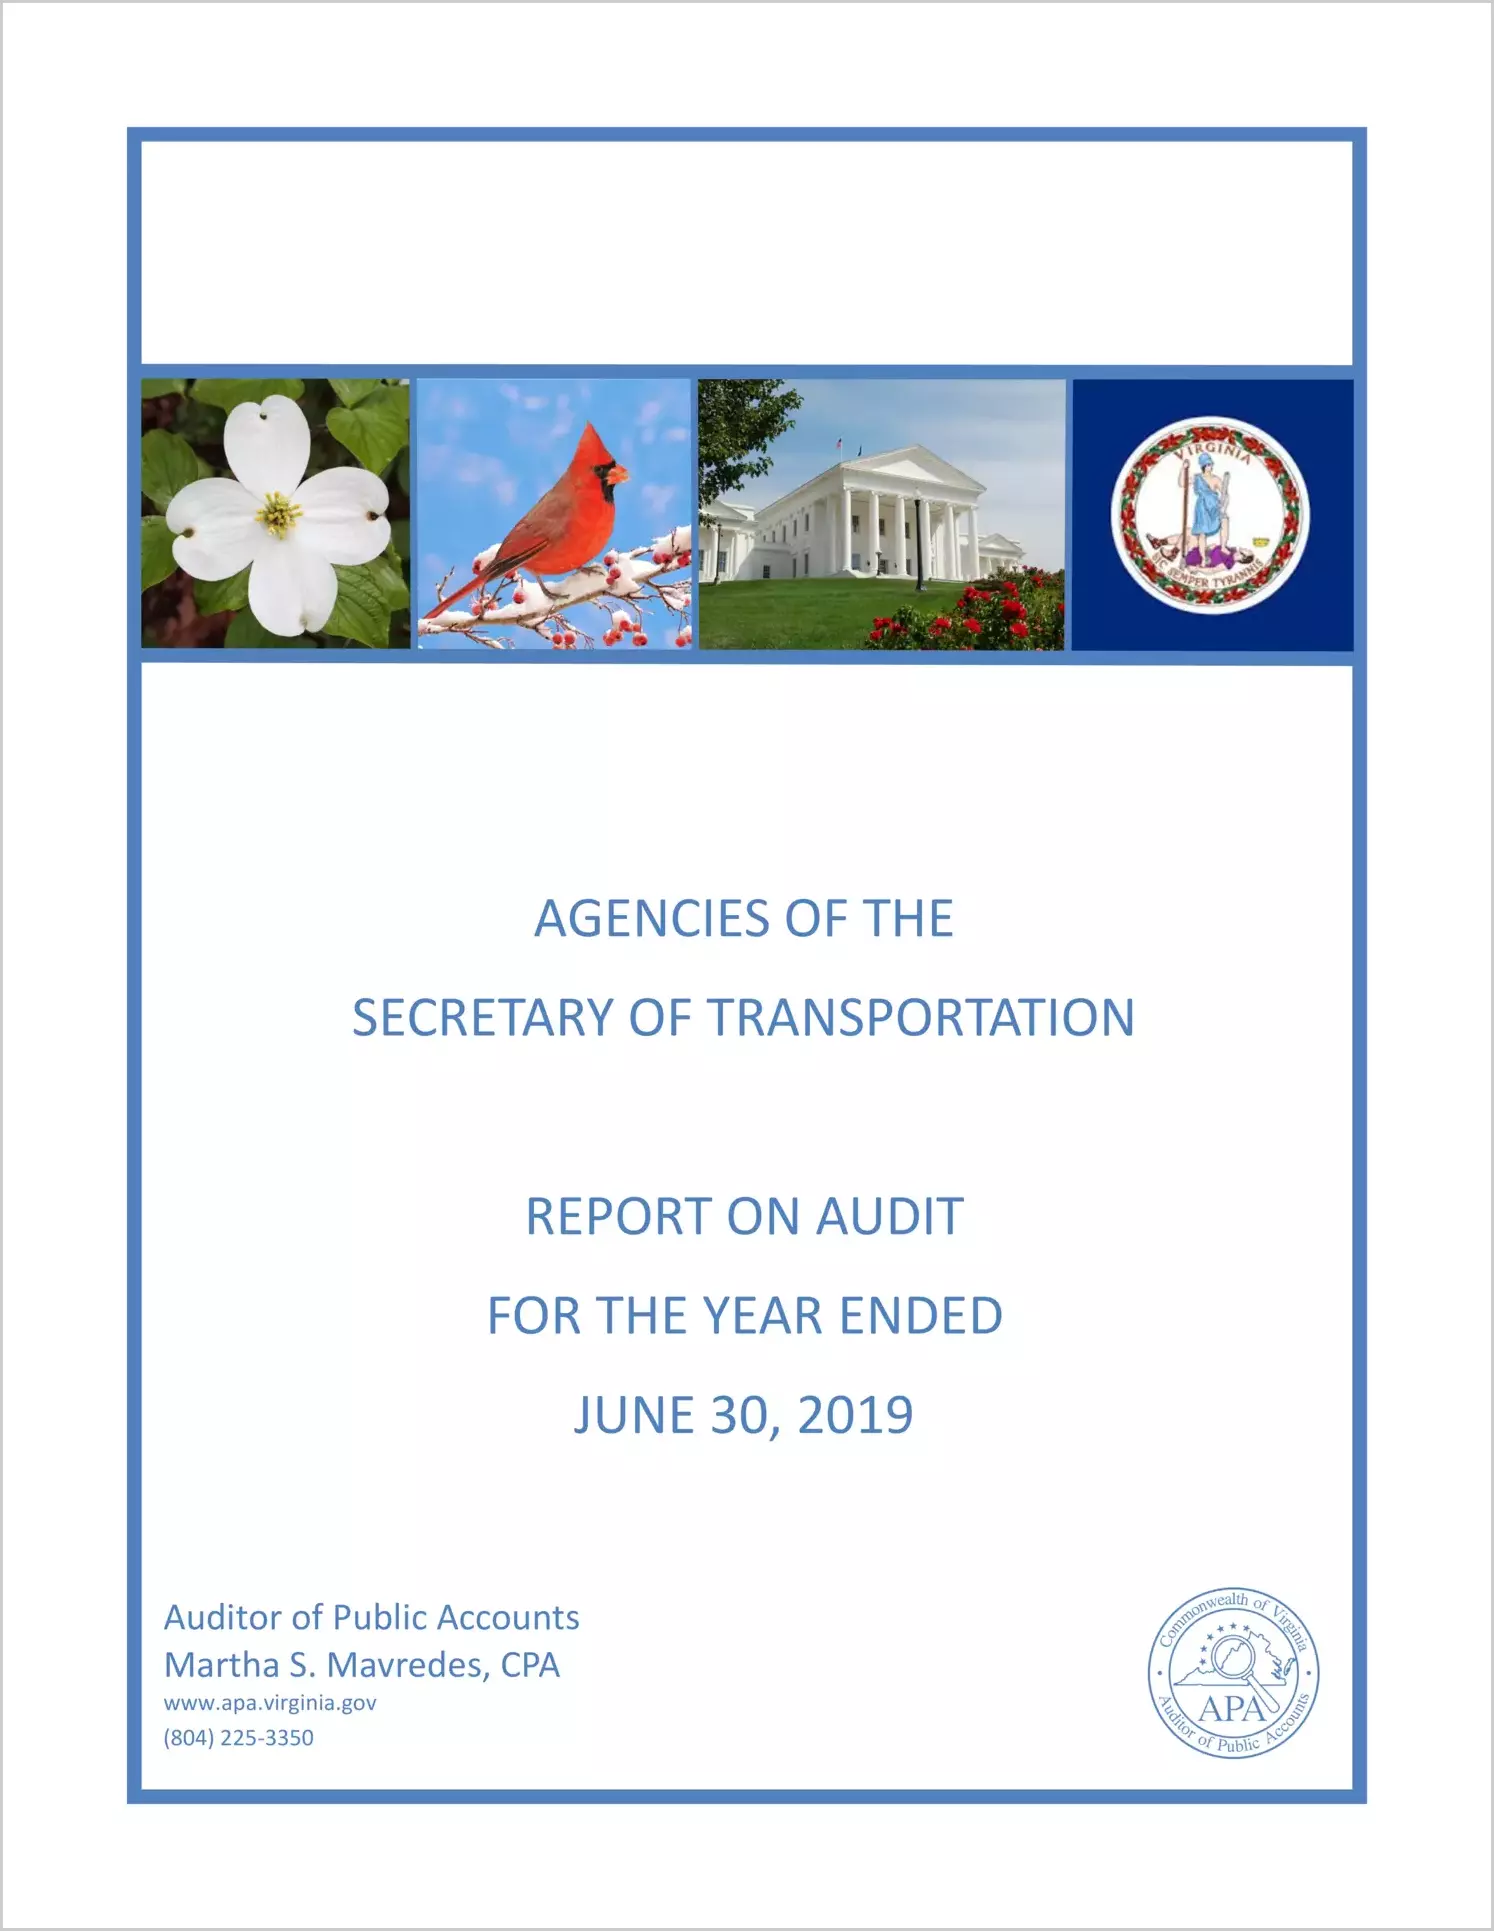 Agencies of the Secretary of Transportation for the year ended June 30, 2019